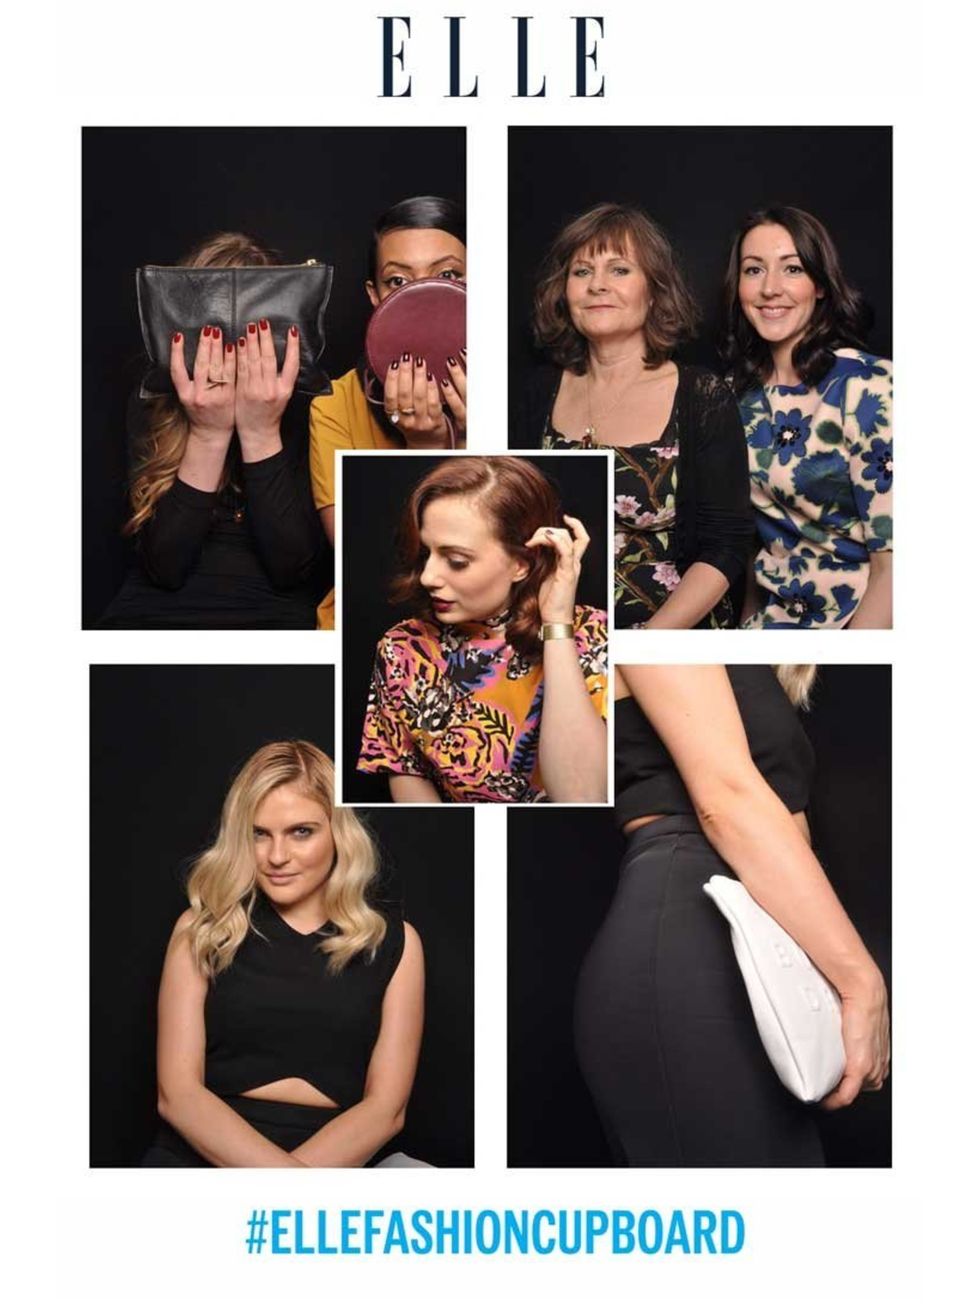 <p><a href="http://www.elleuk.com/style/what-elle-wears">What ELLE Wears </a>extends beyond the amazing array of outfits showcased at the ELLE Style Awards. The team spent an entire day slowly beautifying in the #ELLEfashioncupboard with a team from <a hr